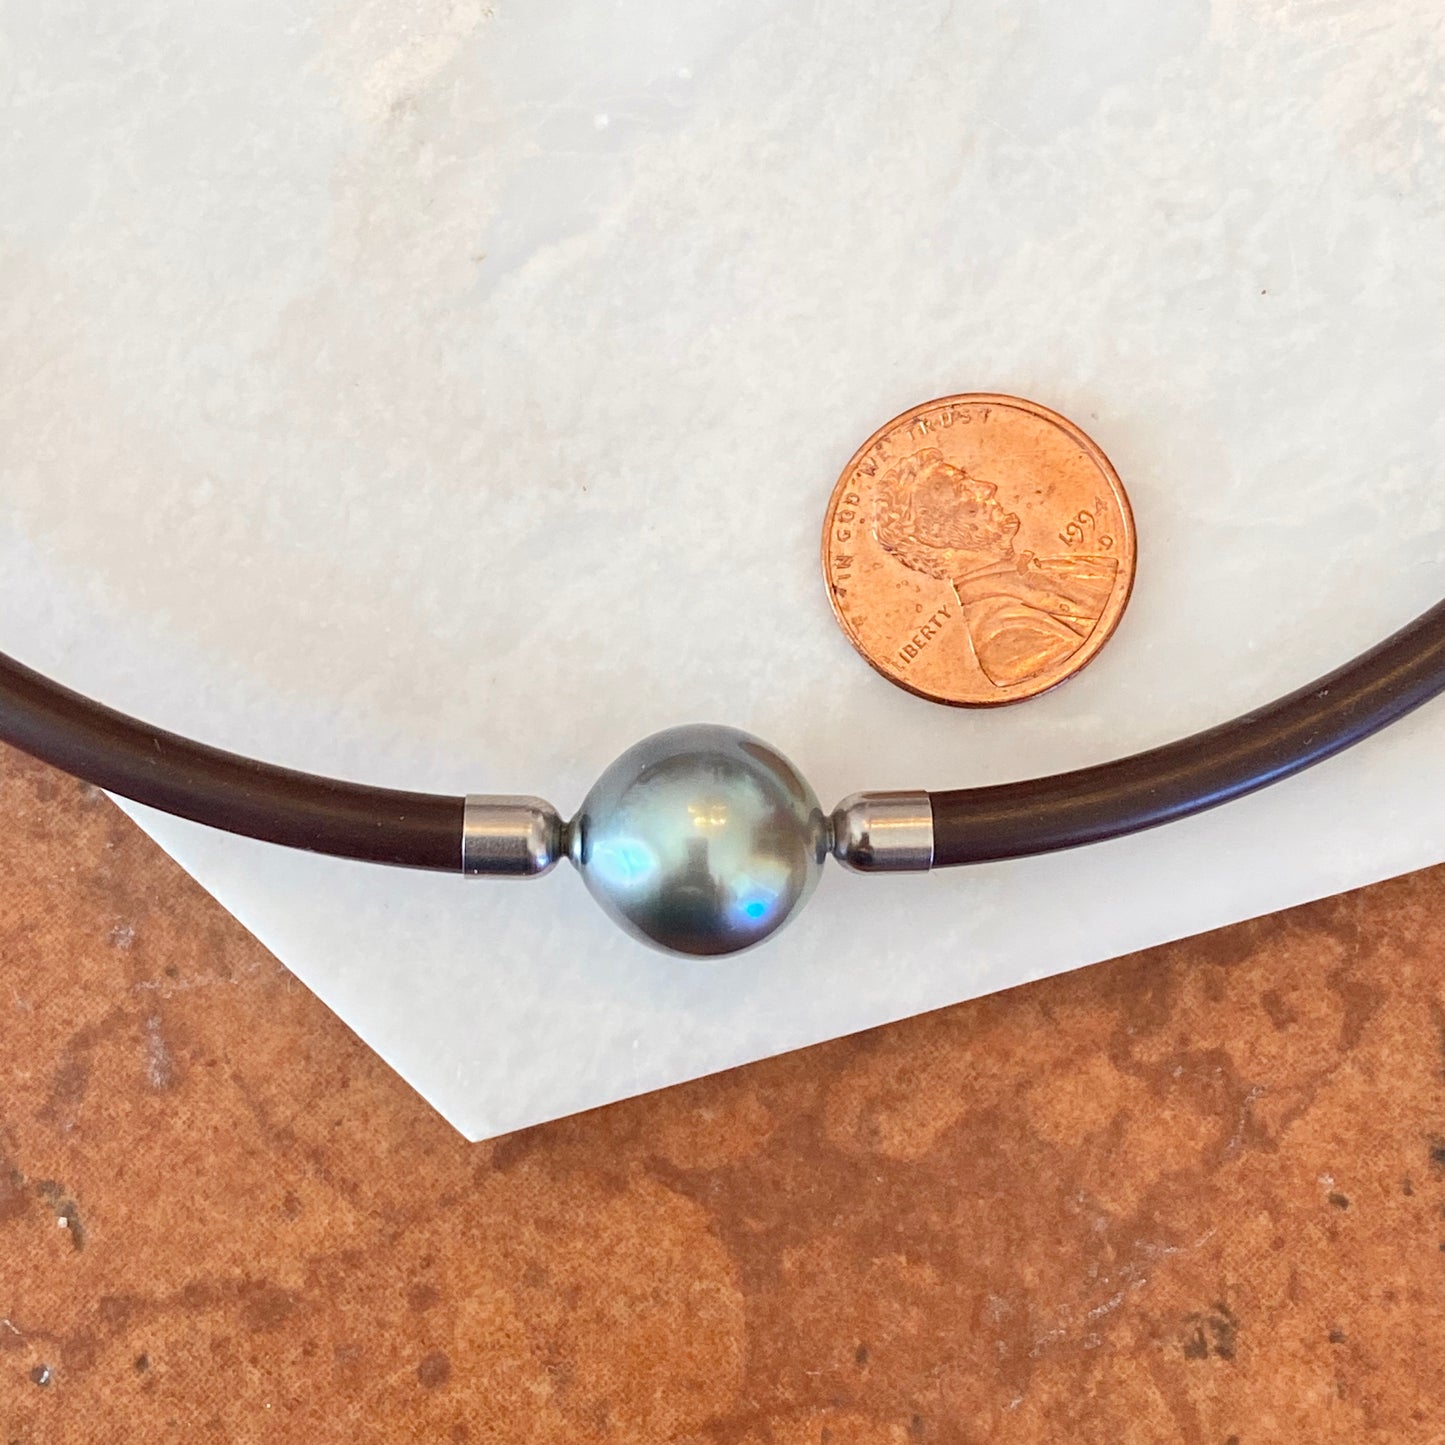 Stainless Steel + Brown Rubber Gray Tahitian Pearl Collar Necklace 16", Stainless Steel + Brown Rubber Gray Tahitian Pearl Collar Necklace 16" - Legacy Saint Jewelry